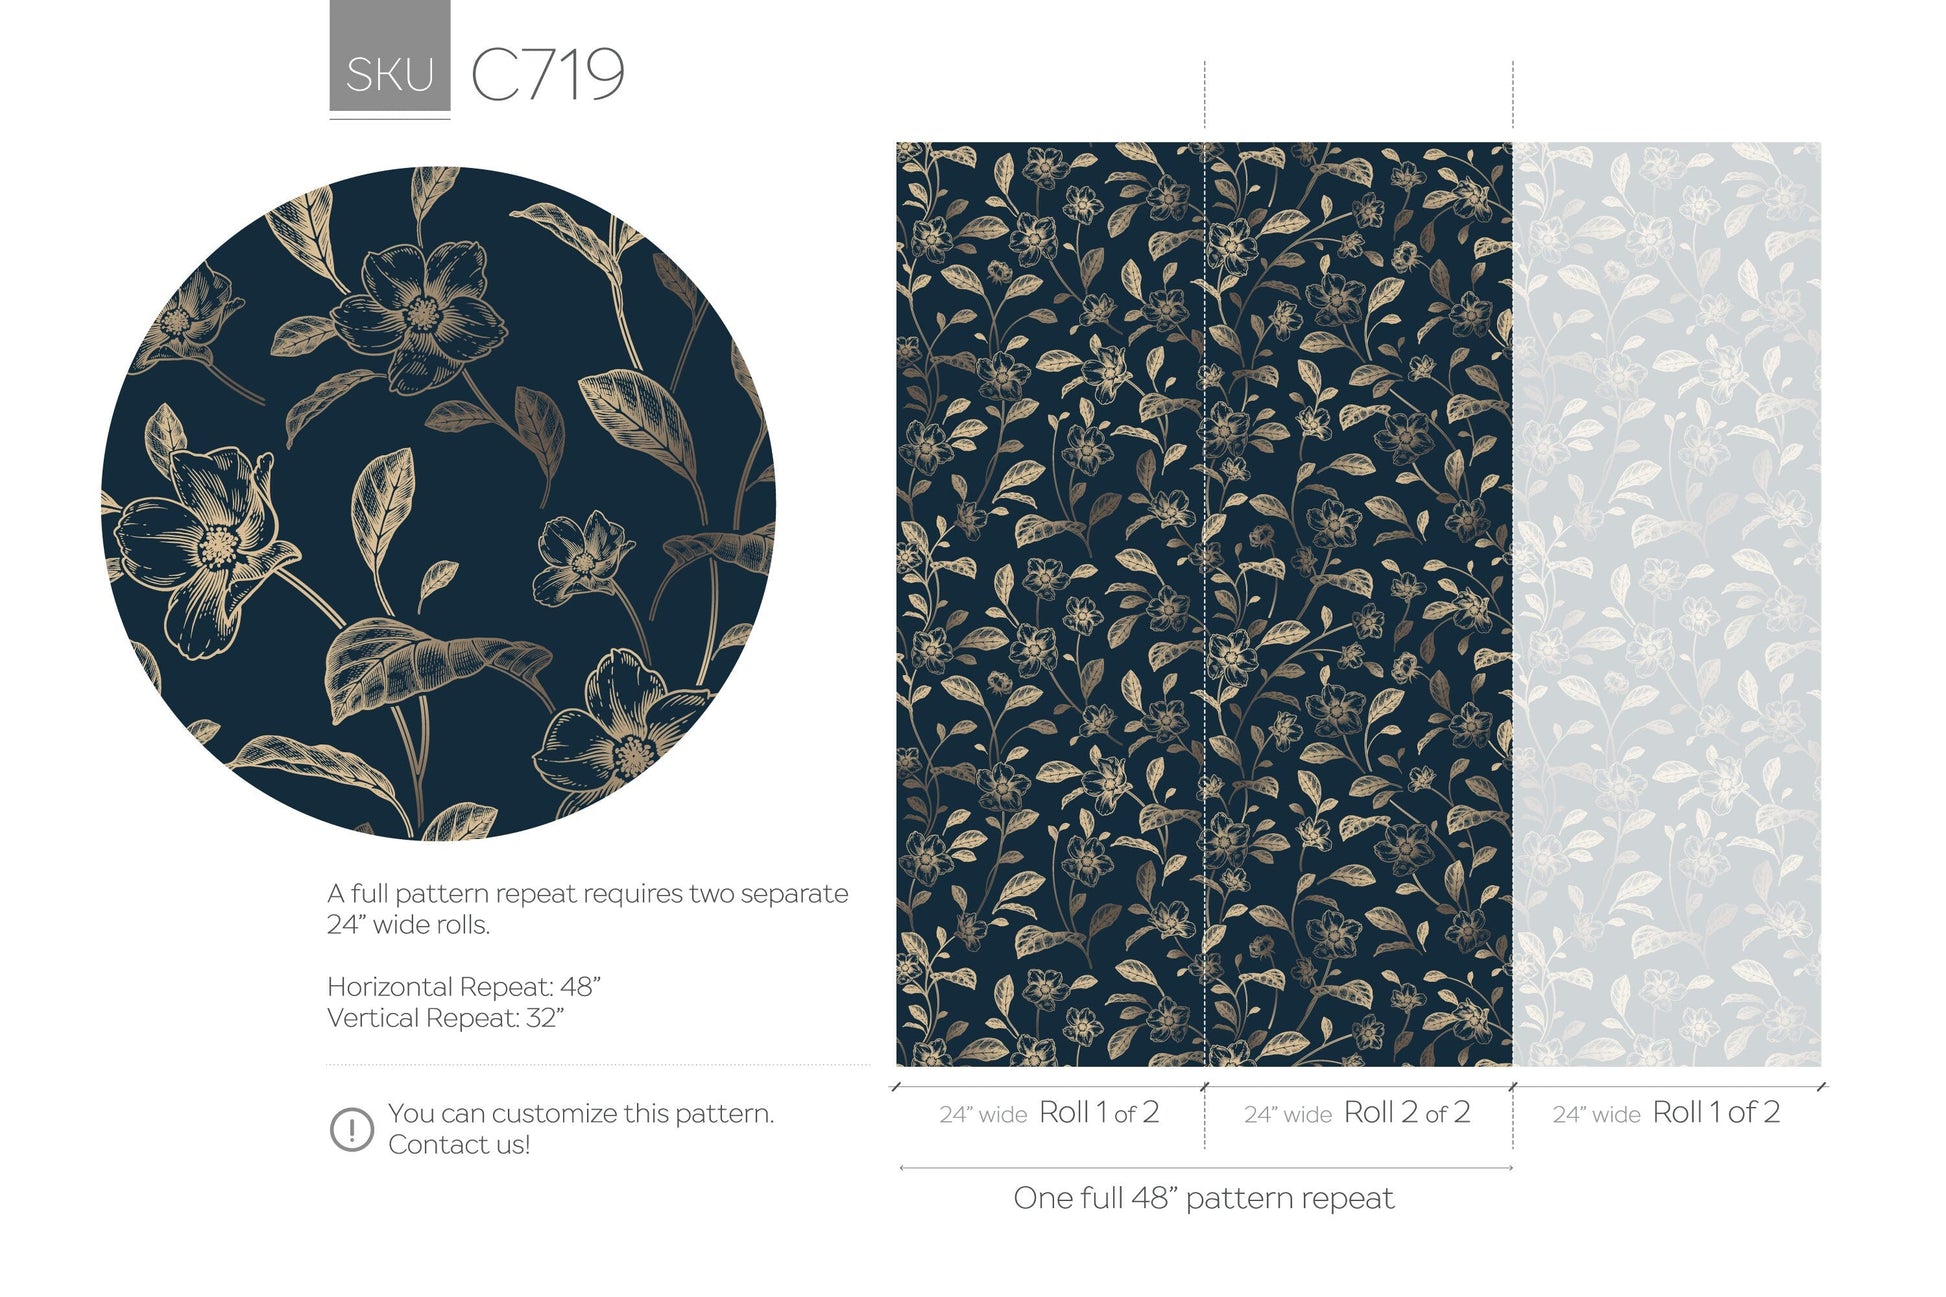 Navy and Gold Floral Vintage Wallpaper / Peel and Stick Wallpaper Removable Wallpaper Home Decor Wall Art Wall Decor Room Decor - C719